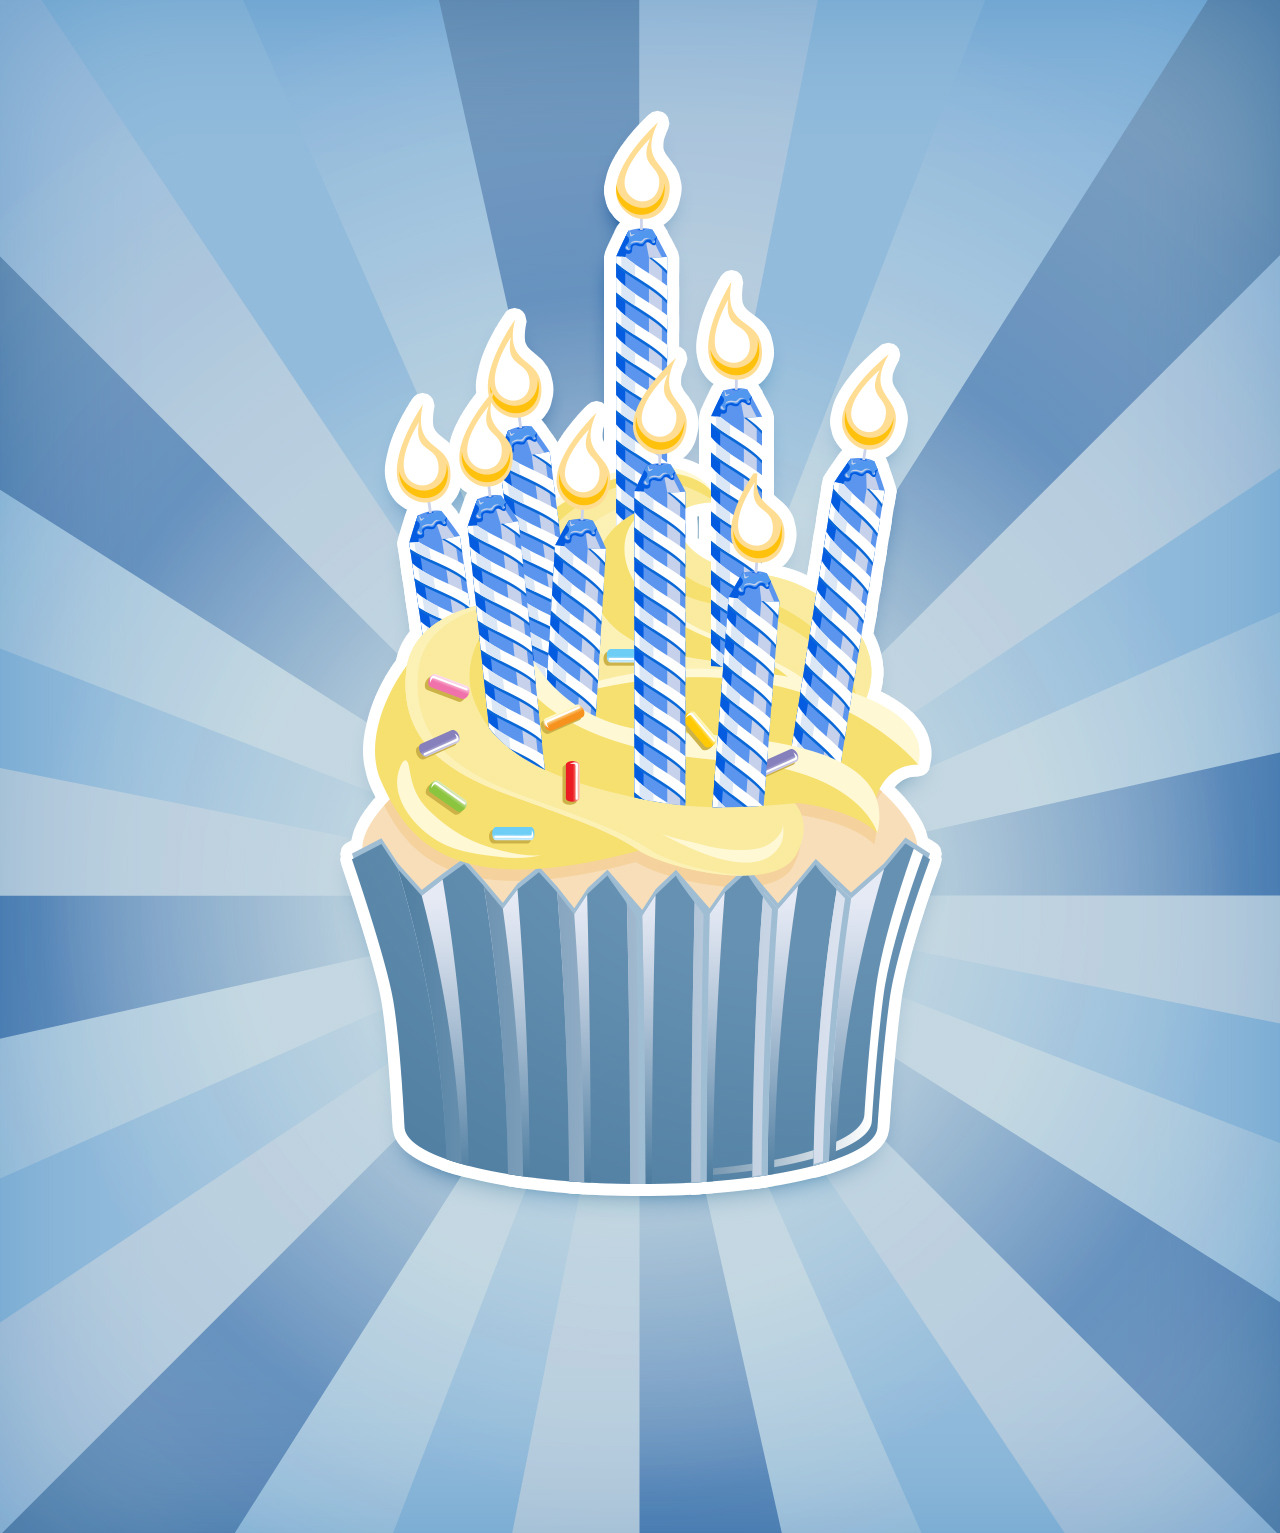 jtumblr turned 9 today!